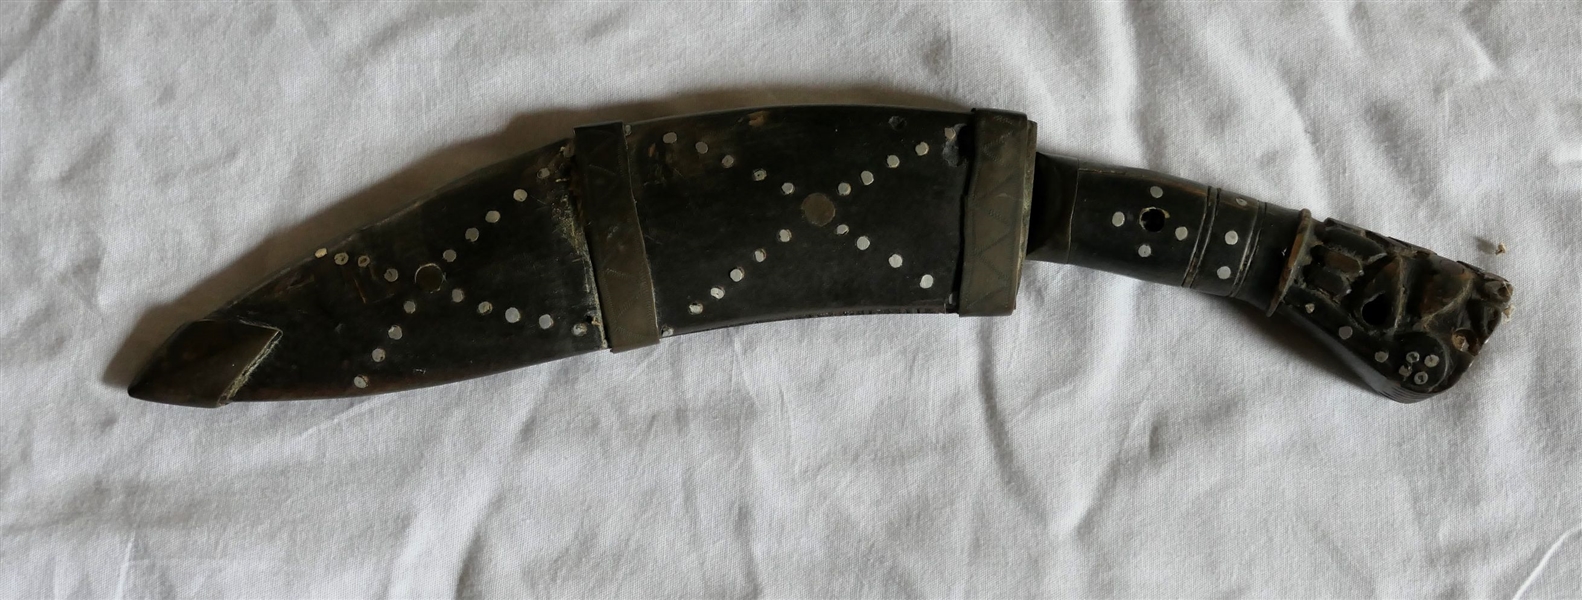 Foreign Knife with Horn Sheath and Handle - Curved Blade -Knife Measures 10 1/2" Long - 1 Metal Band Is Missing on Sheath 